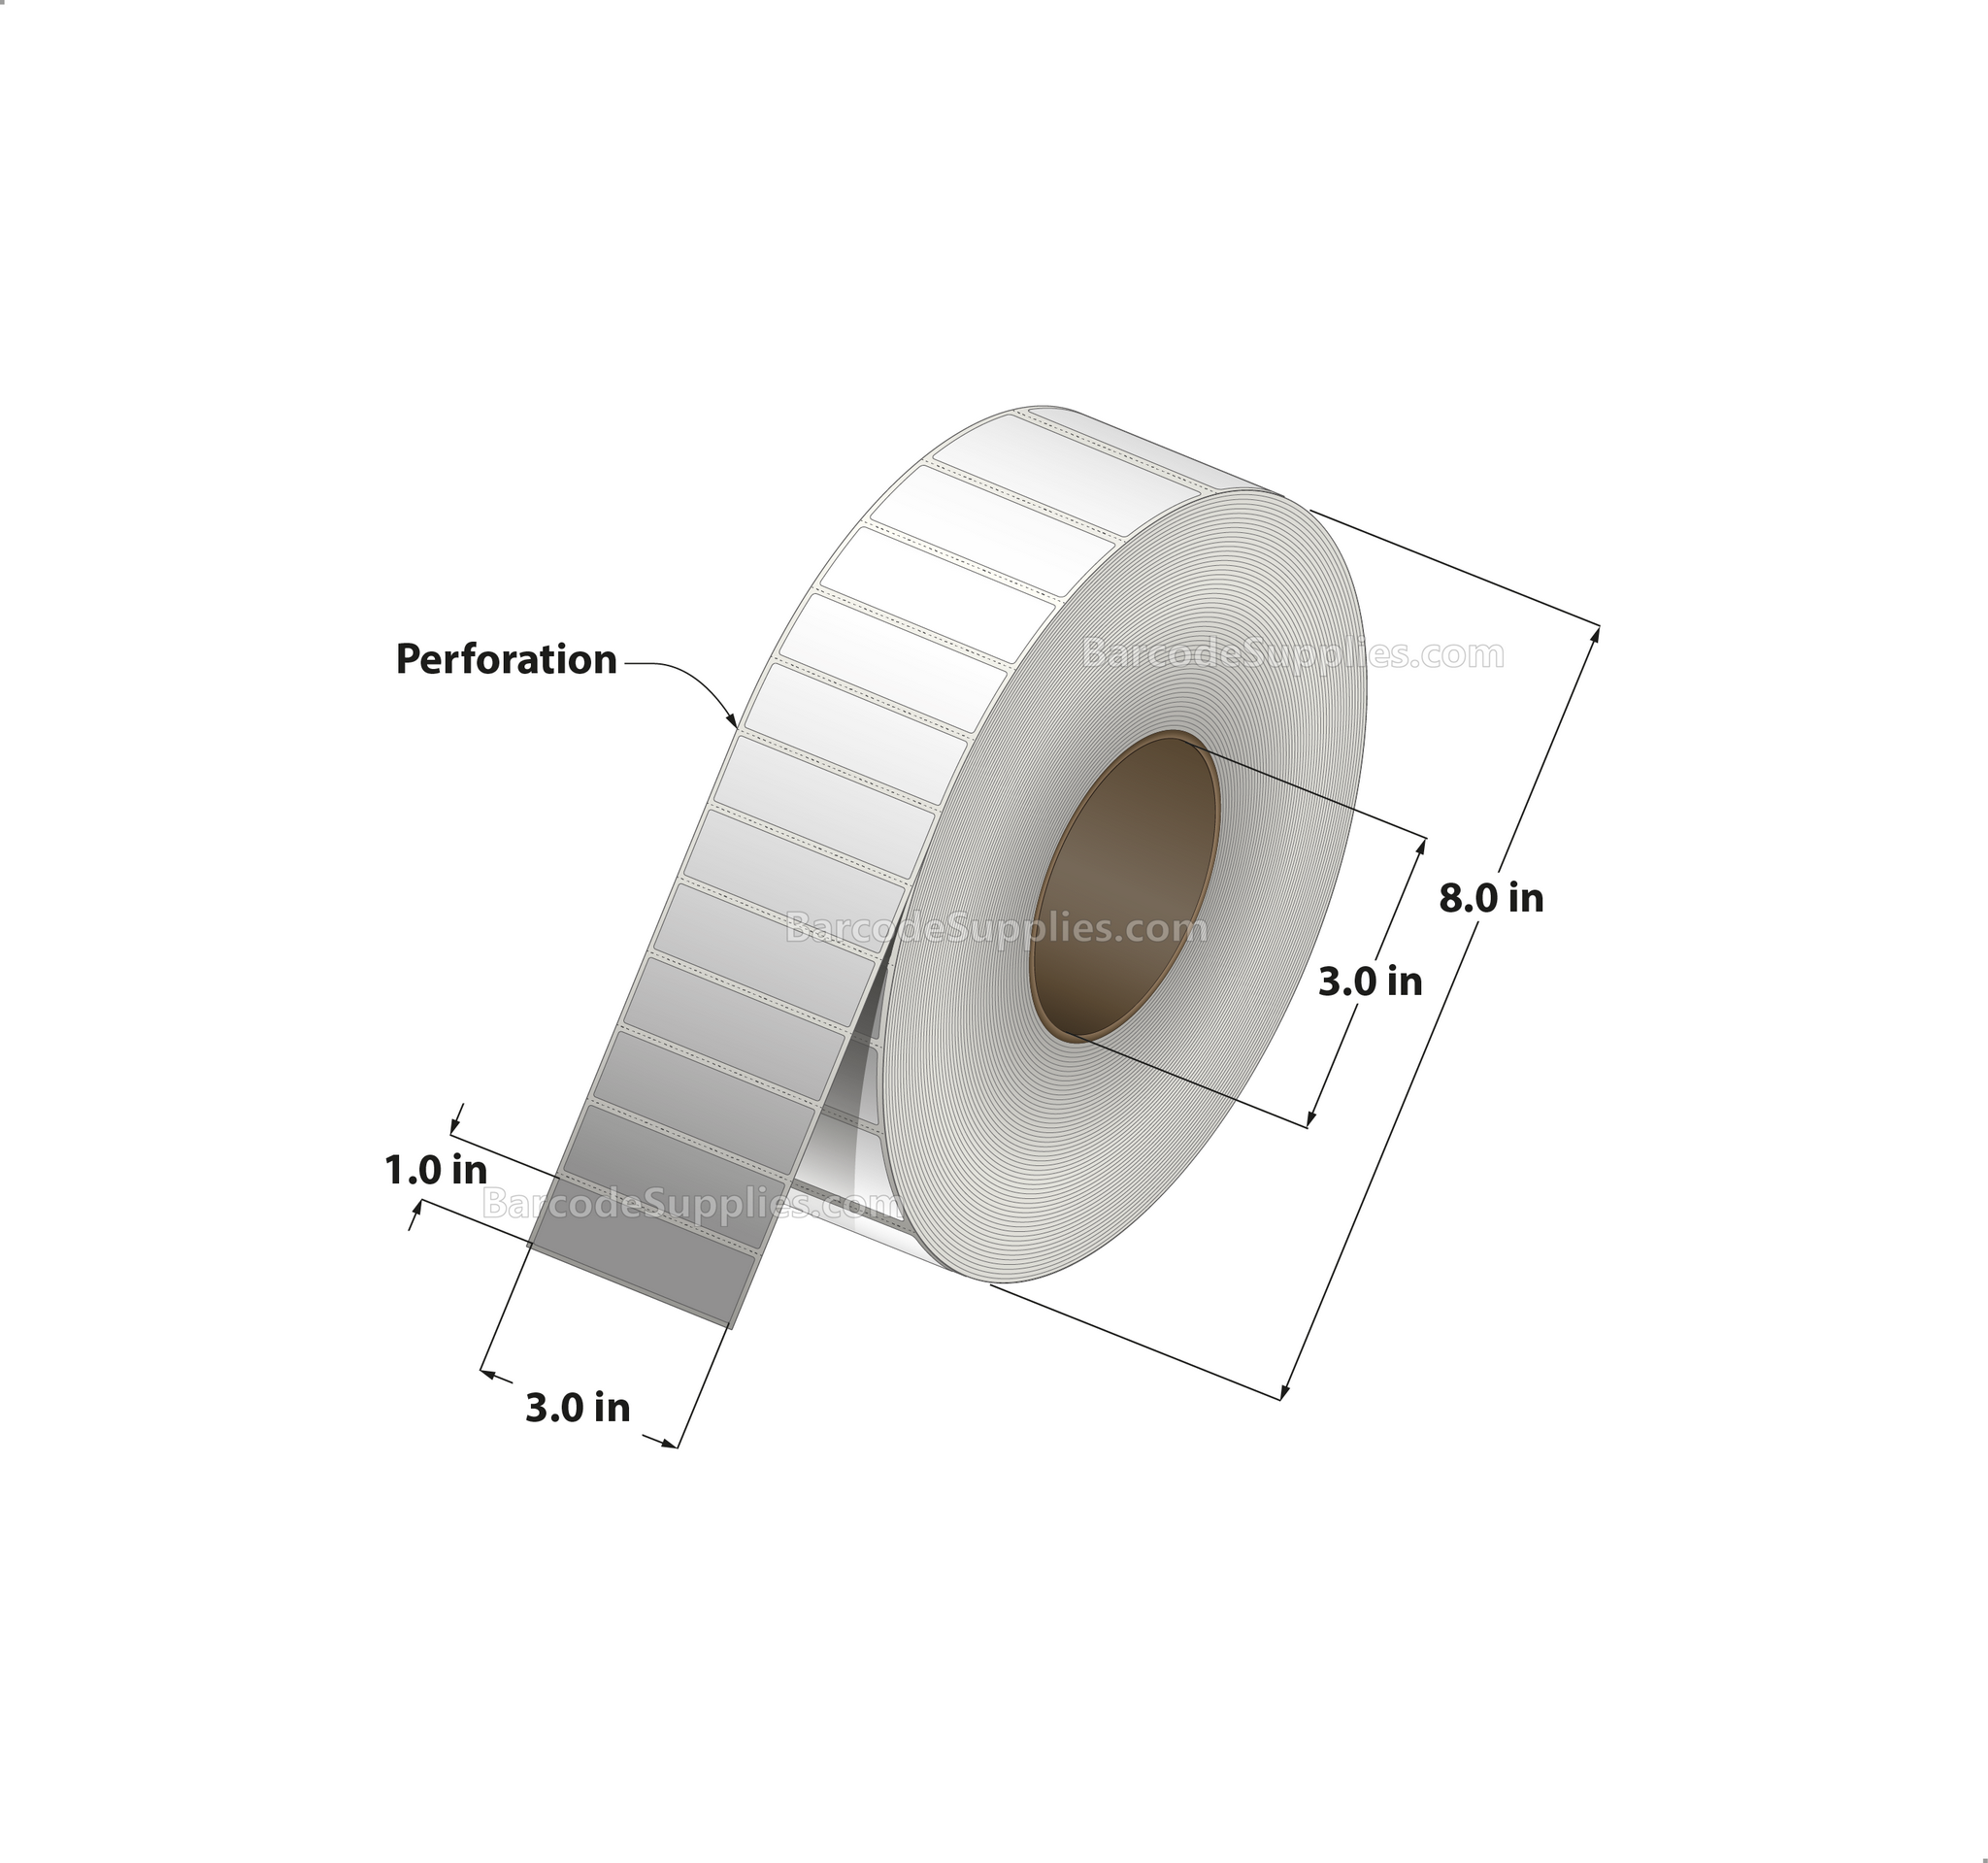 3 x 1 Thermal Transfer White Labels With Permanent Adhesive - Perforated - 5000 Labels Per Roll - Carton Of 8 Rolls - 40000 Labels Total - MPN: RP-3-1-5000-3